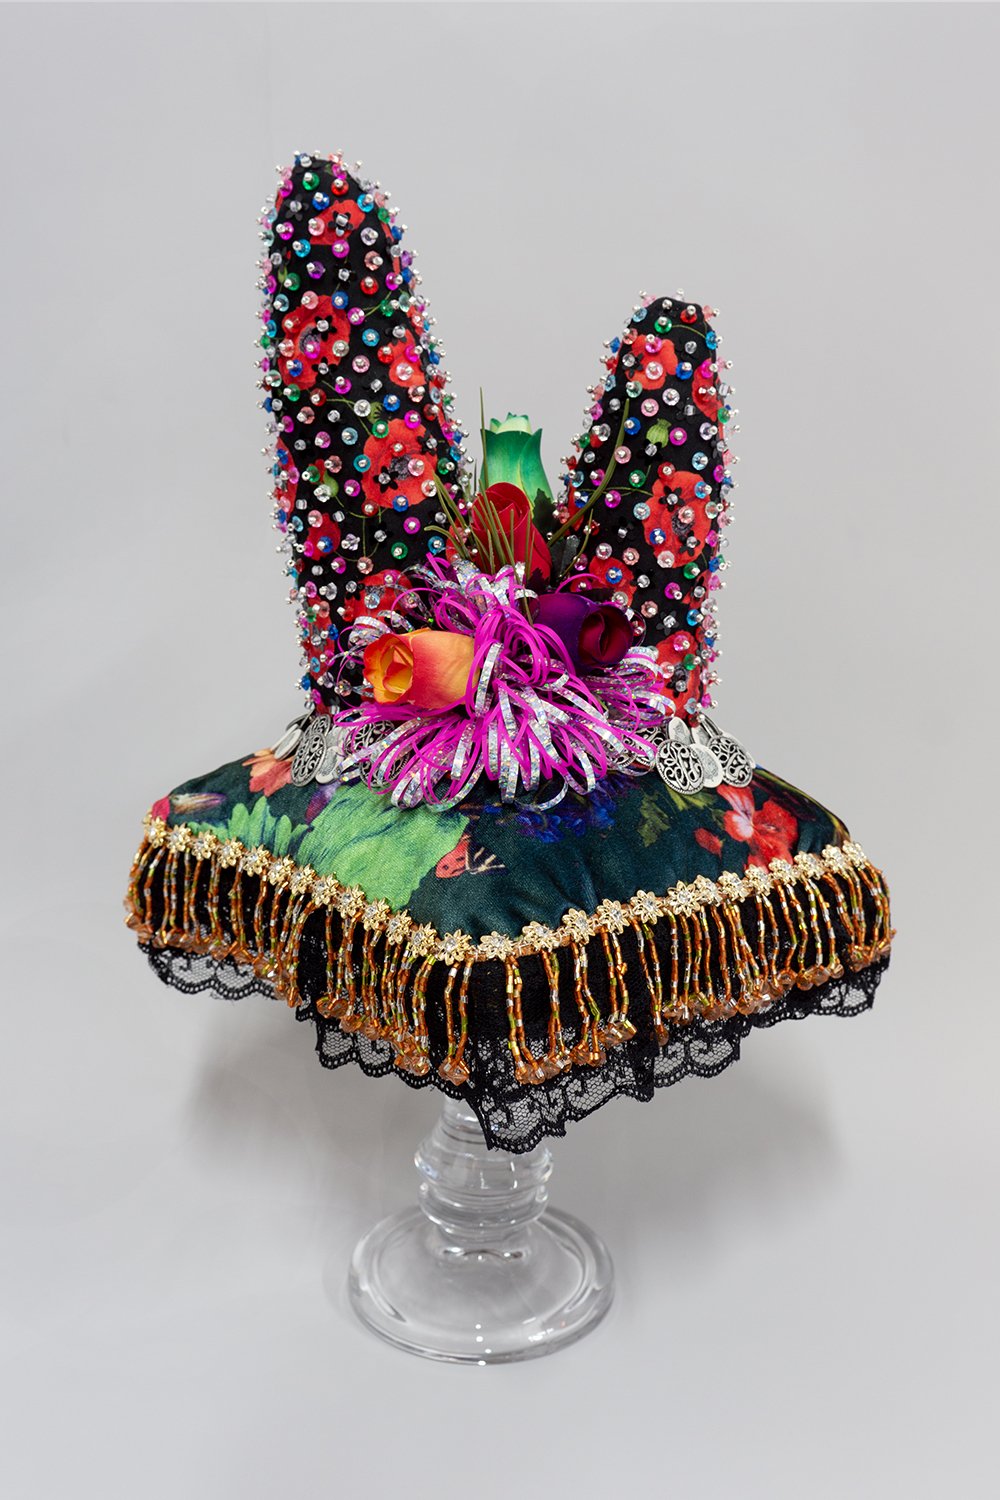   Untitled,  2024, Plastic beads, found fabric, trim, wood and plastic flowers, buttons, ribbon, polyester batting, thread, glass stand, 18.5 x 9 x 9” 